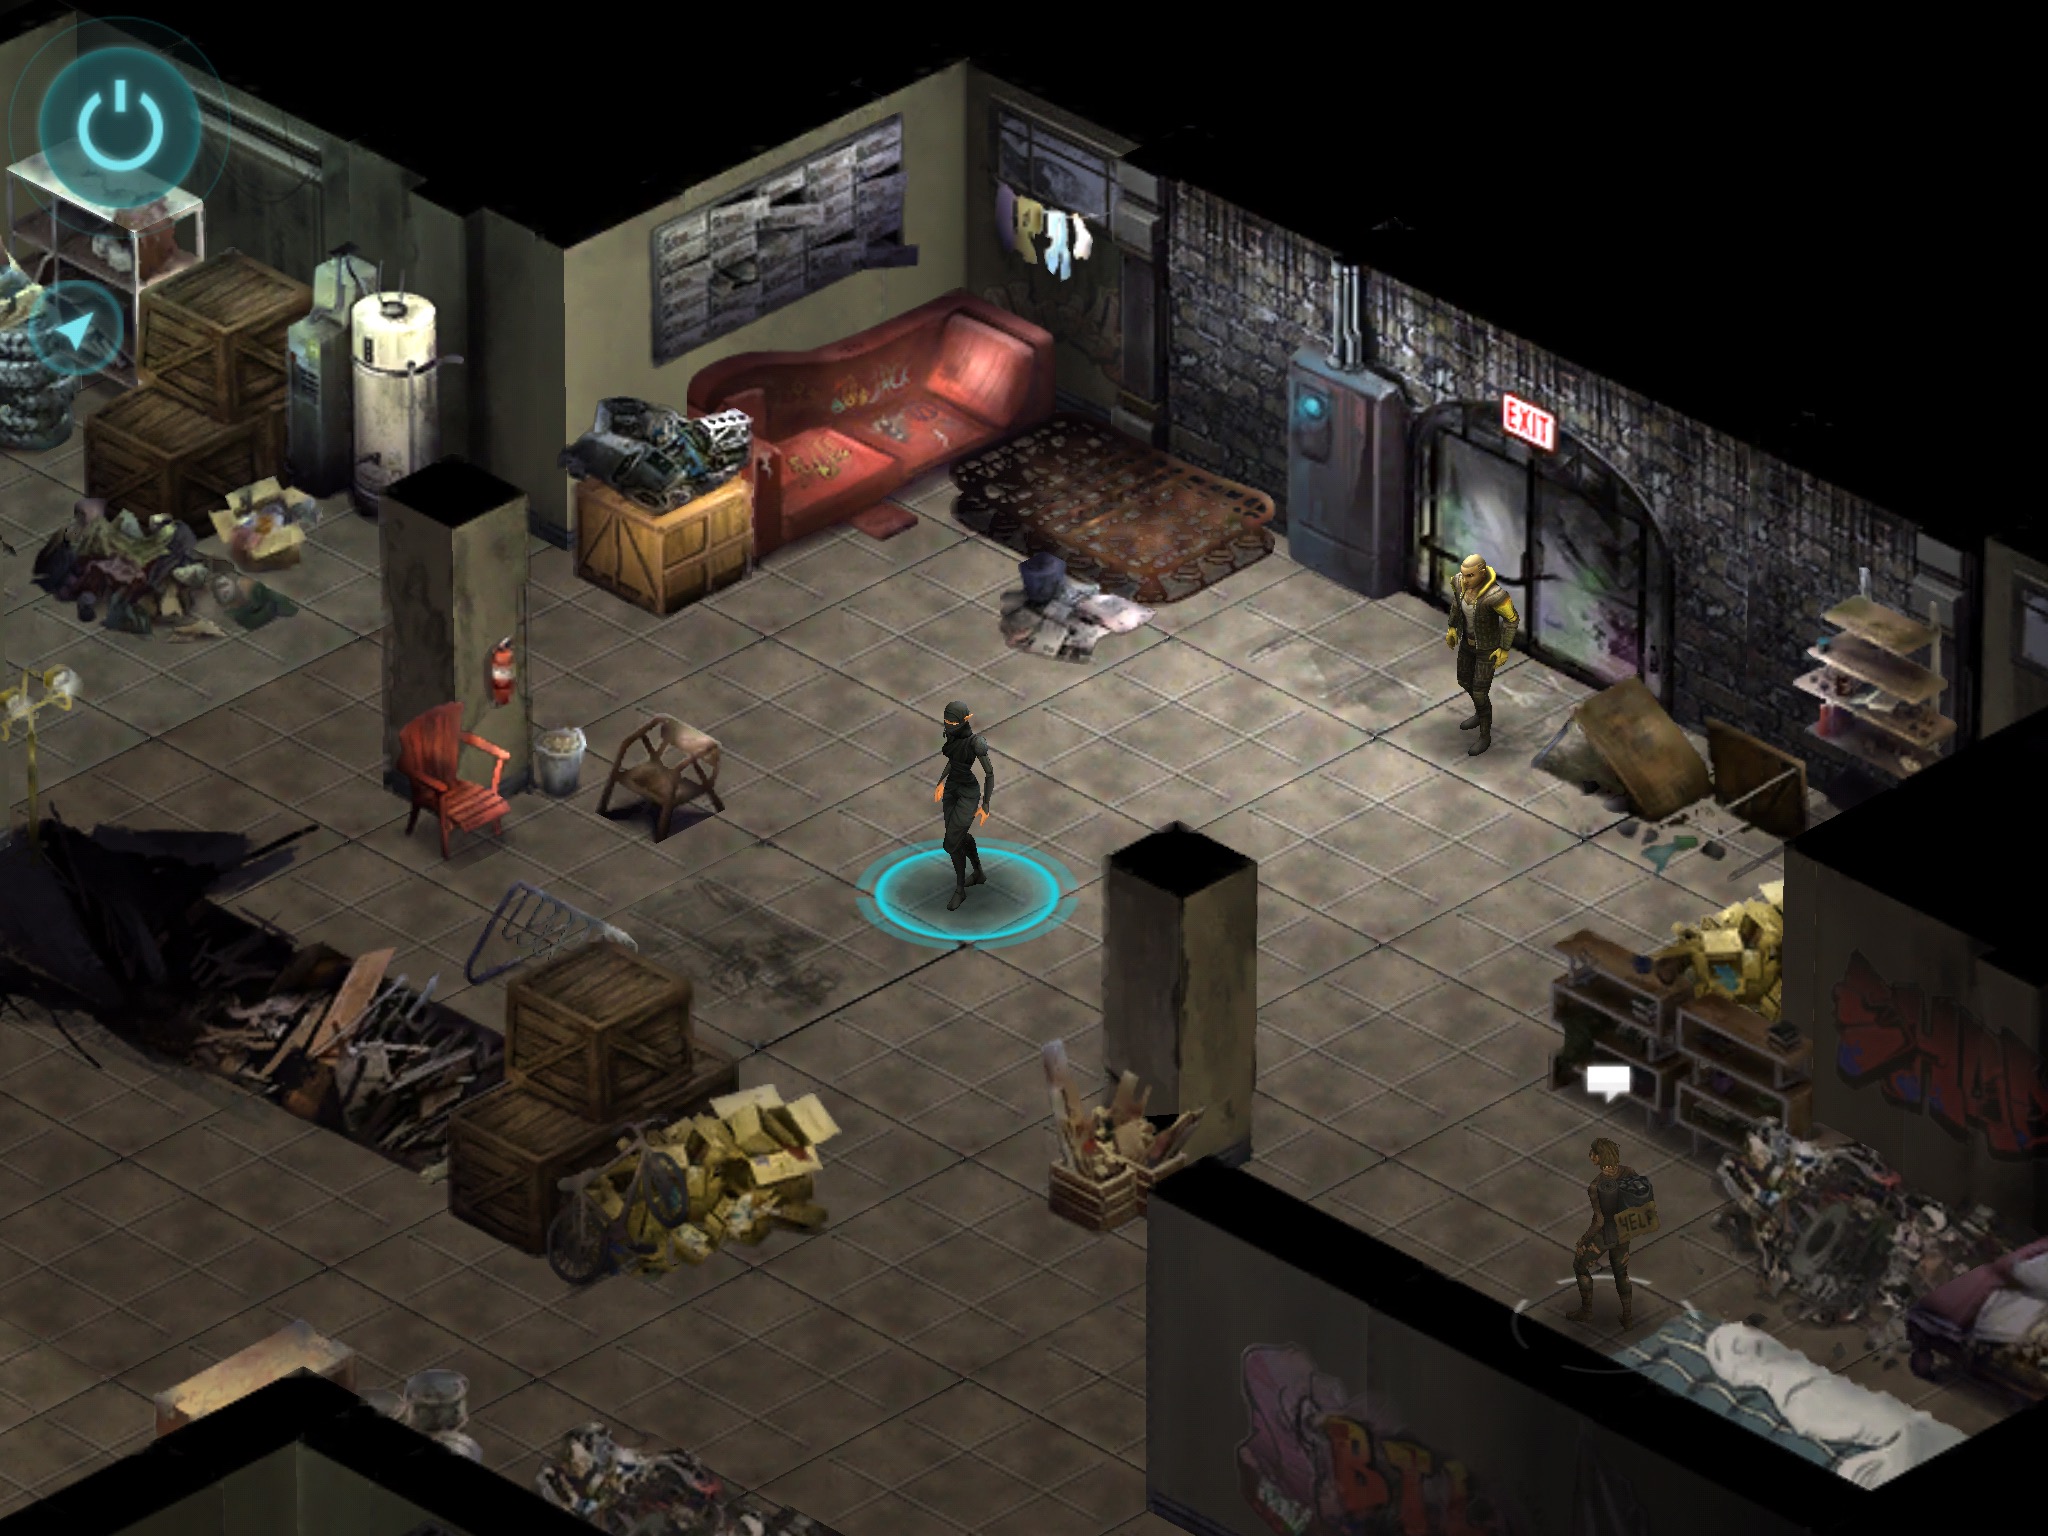 Beam Software's Shadowrun is a hot summer night you can stick in